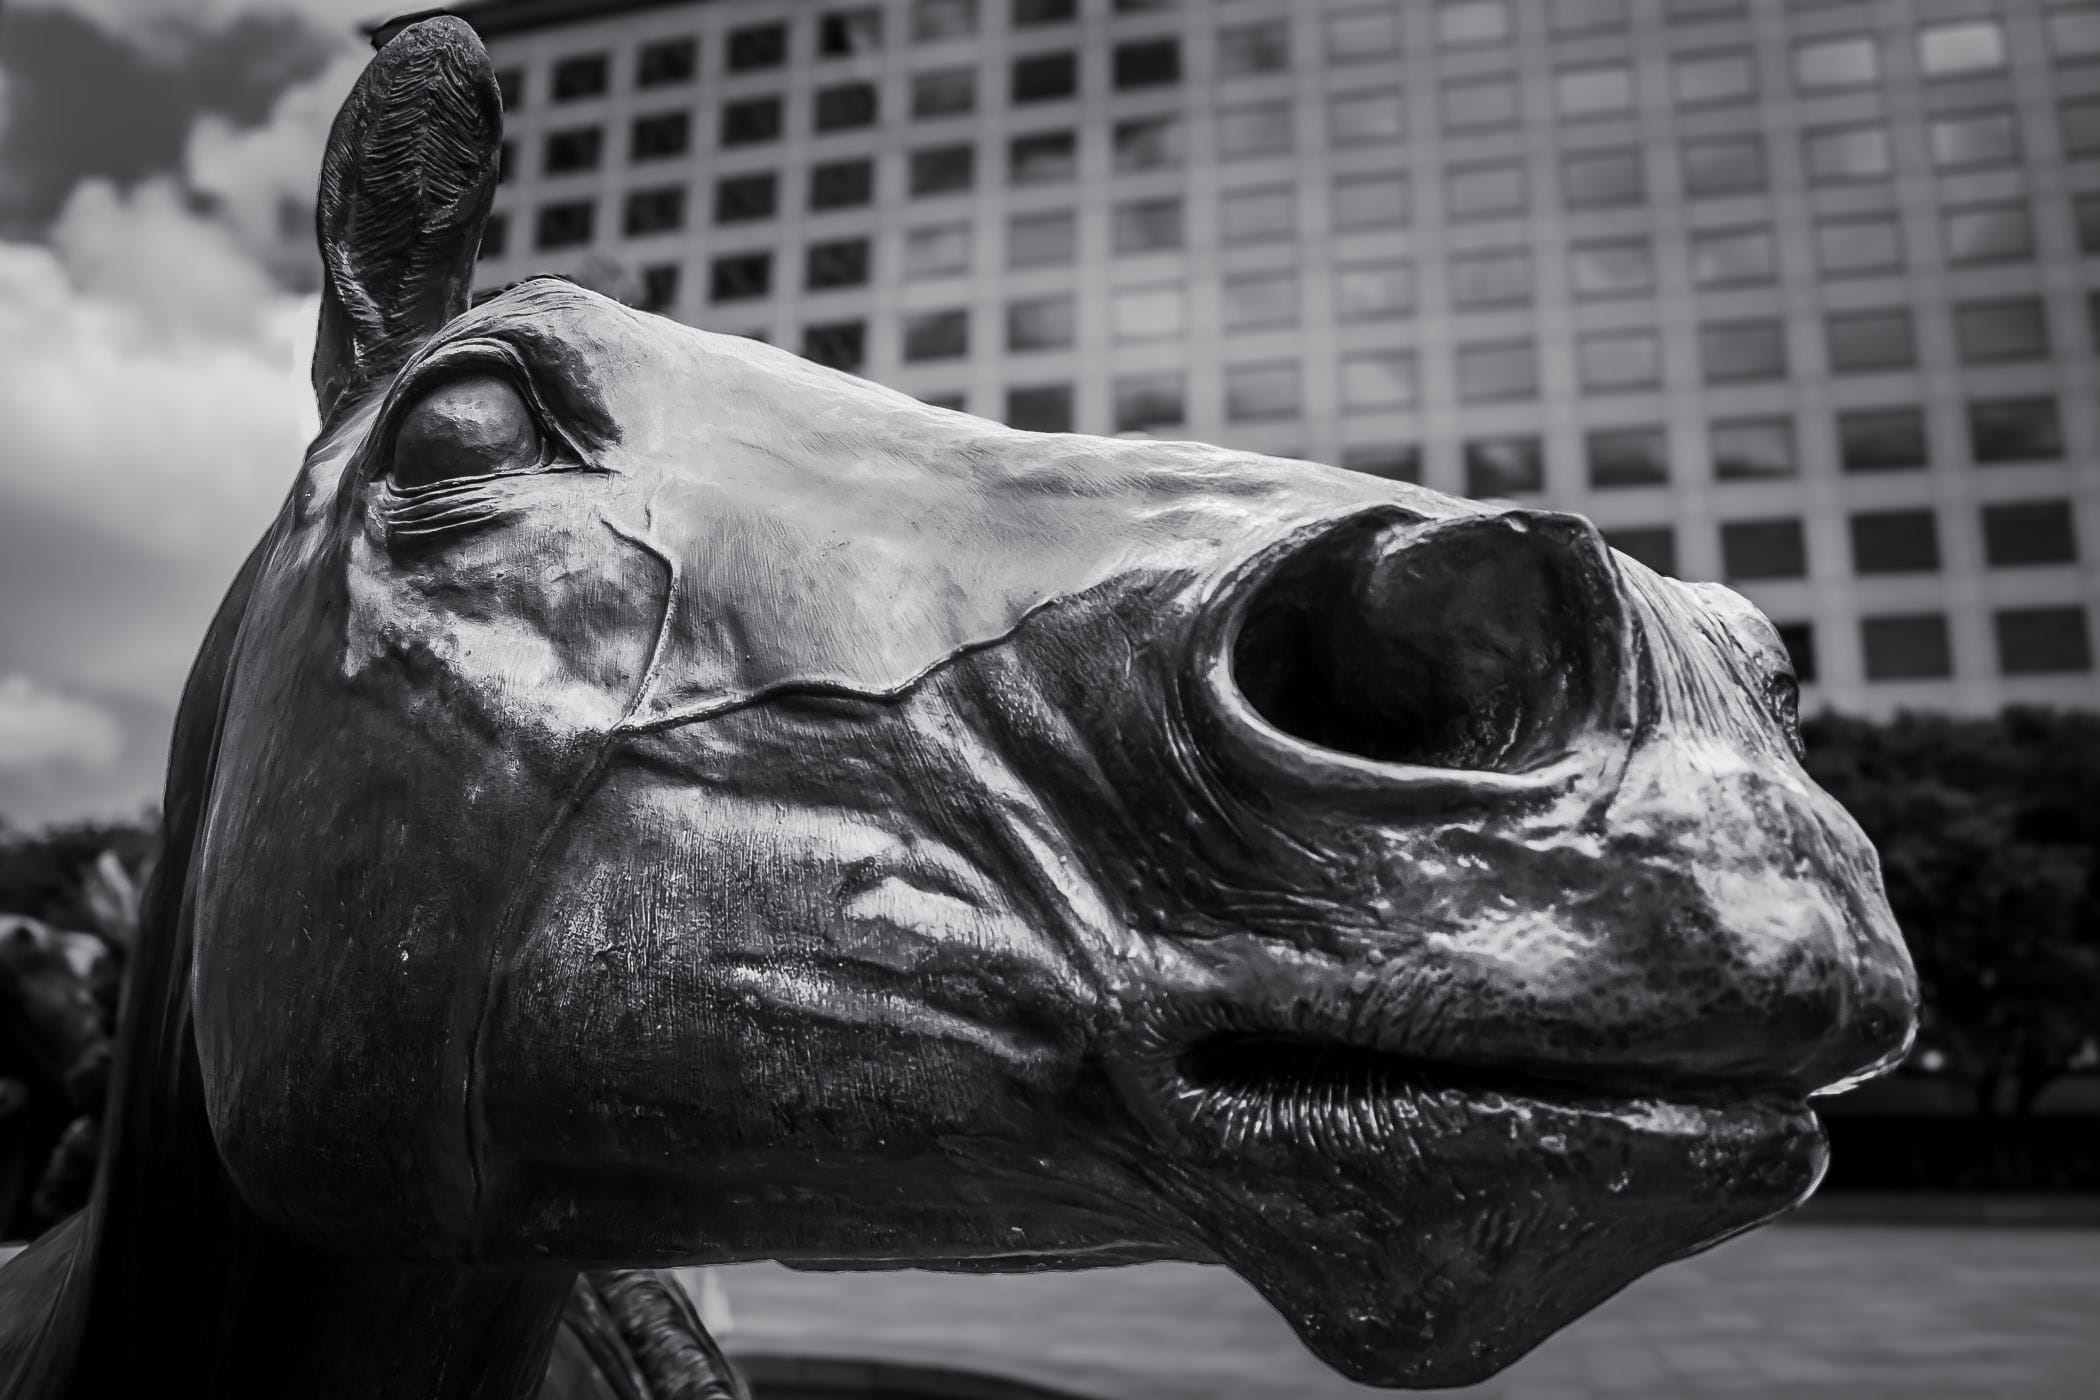 Detail of one of the constituent sculptures of The Mustangs at Las Colinas, Irving, Texas.